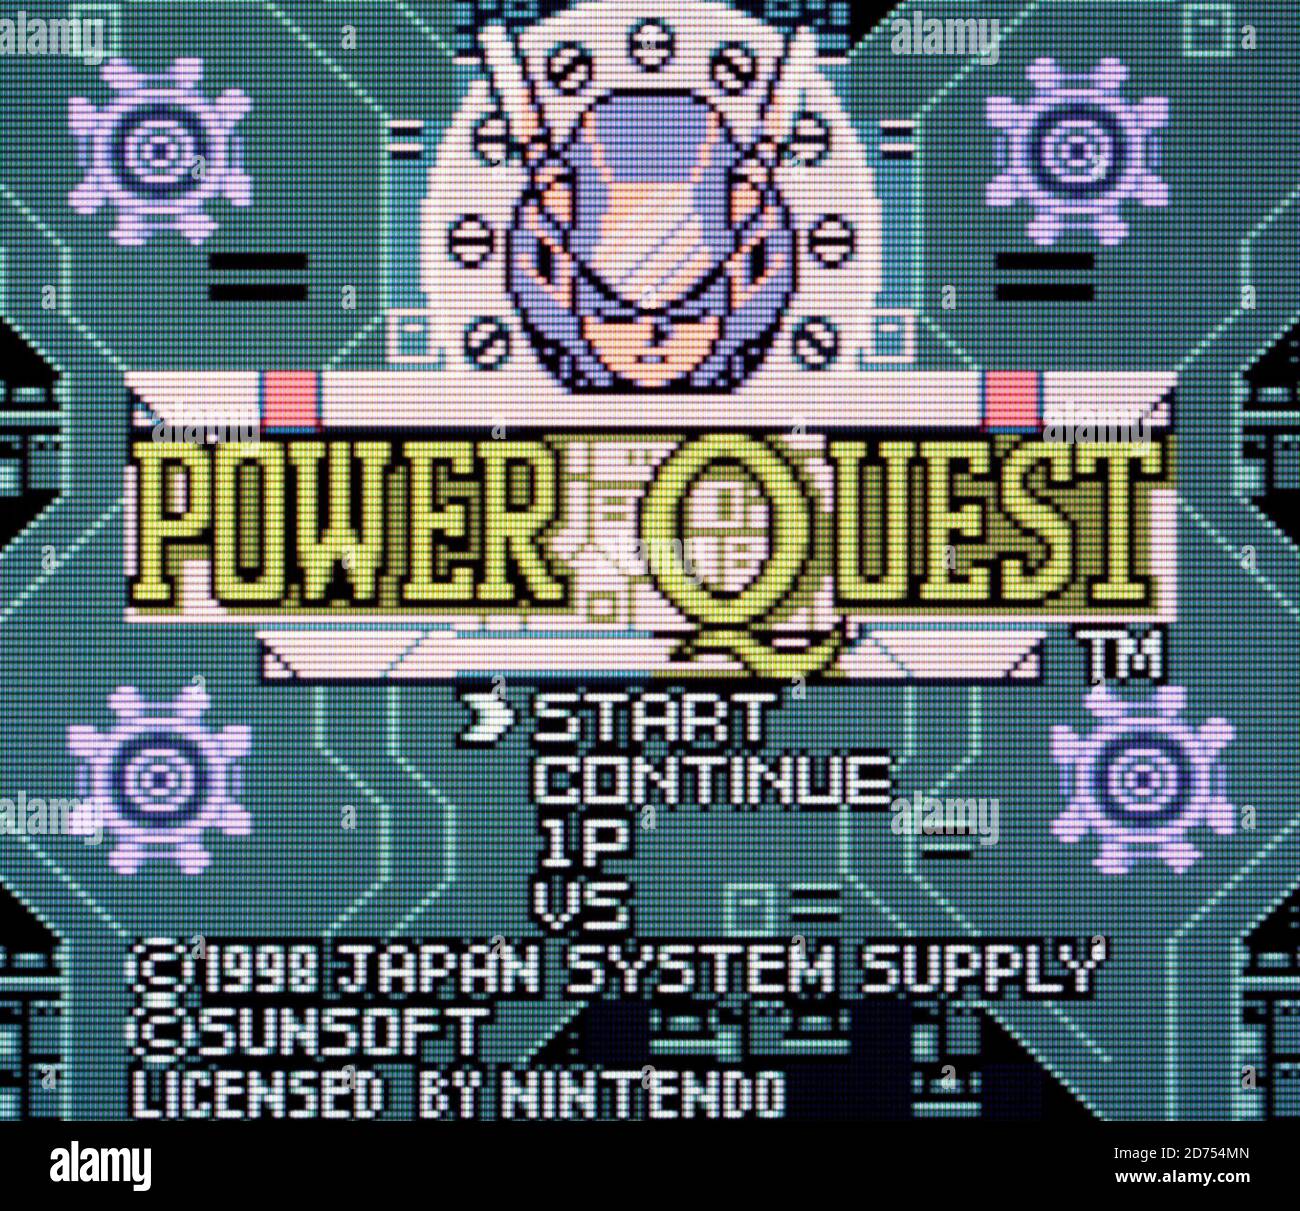 Power Quest - Nintendo Game Boy Color Videogame - Editorial use only Stock  Photo - Alamy